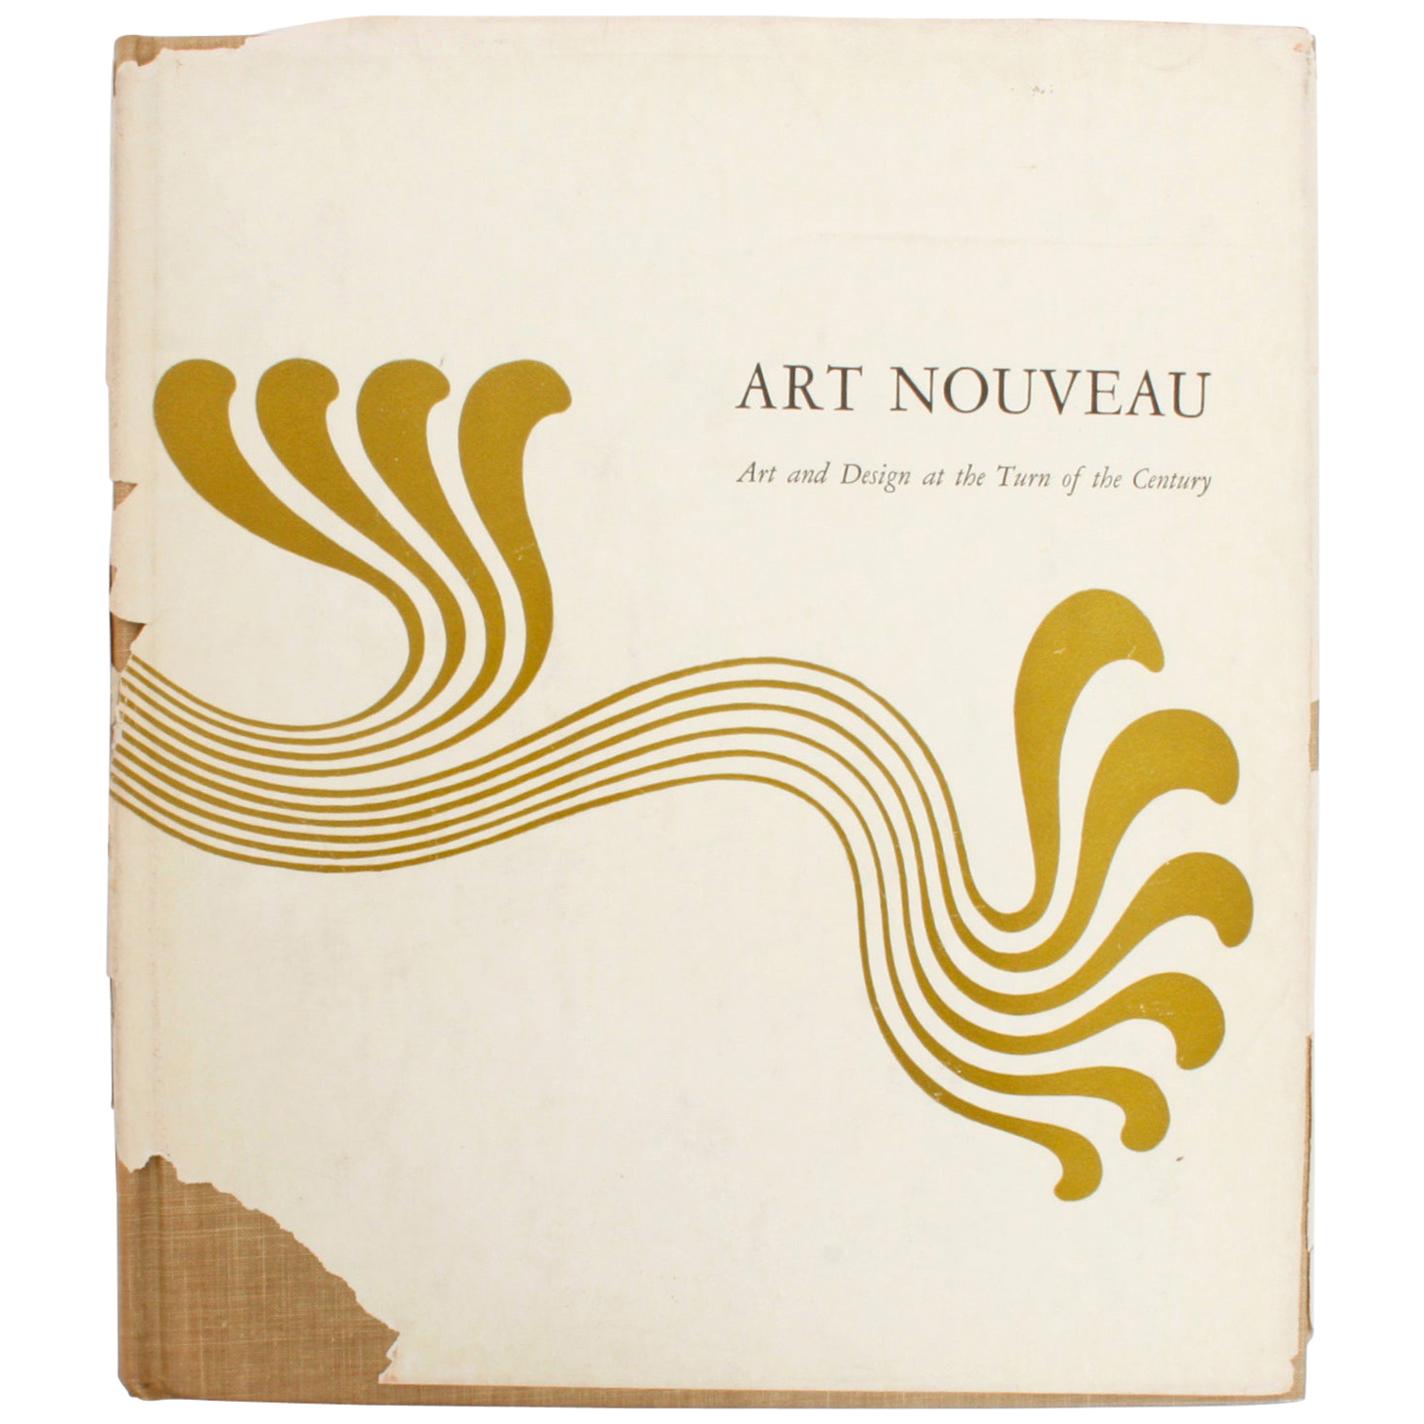 Art Nouveau, Art Design at the Turn of the Century, Firstst Edition